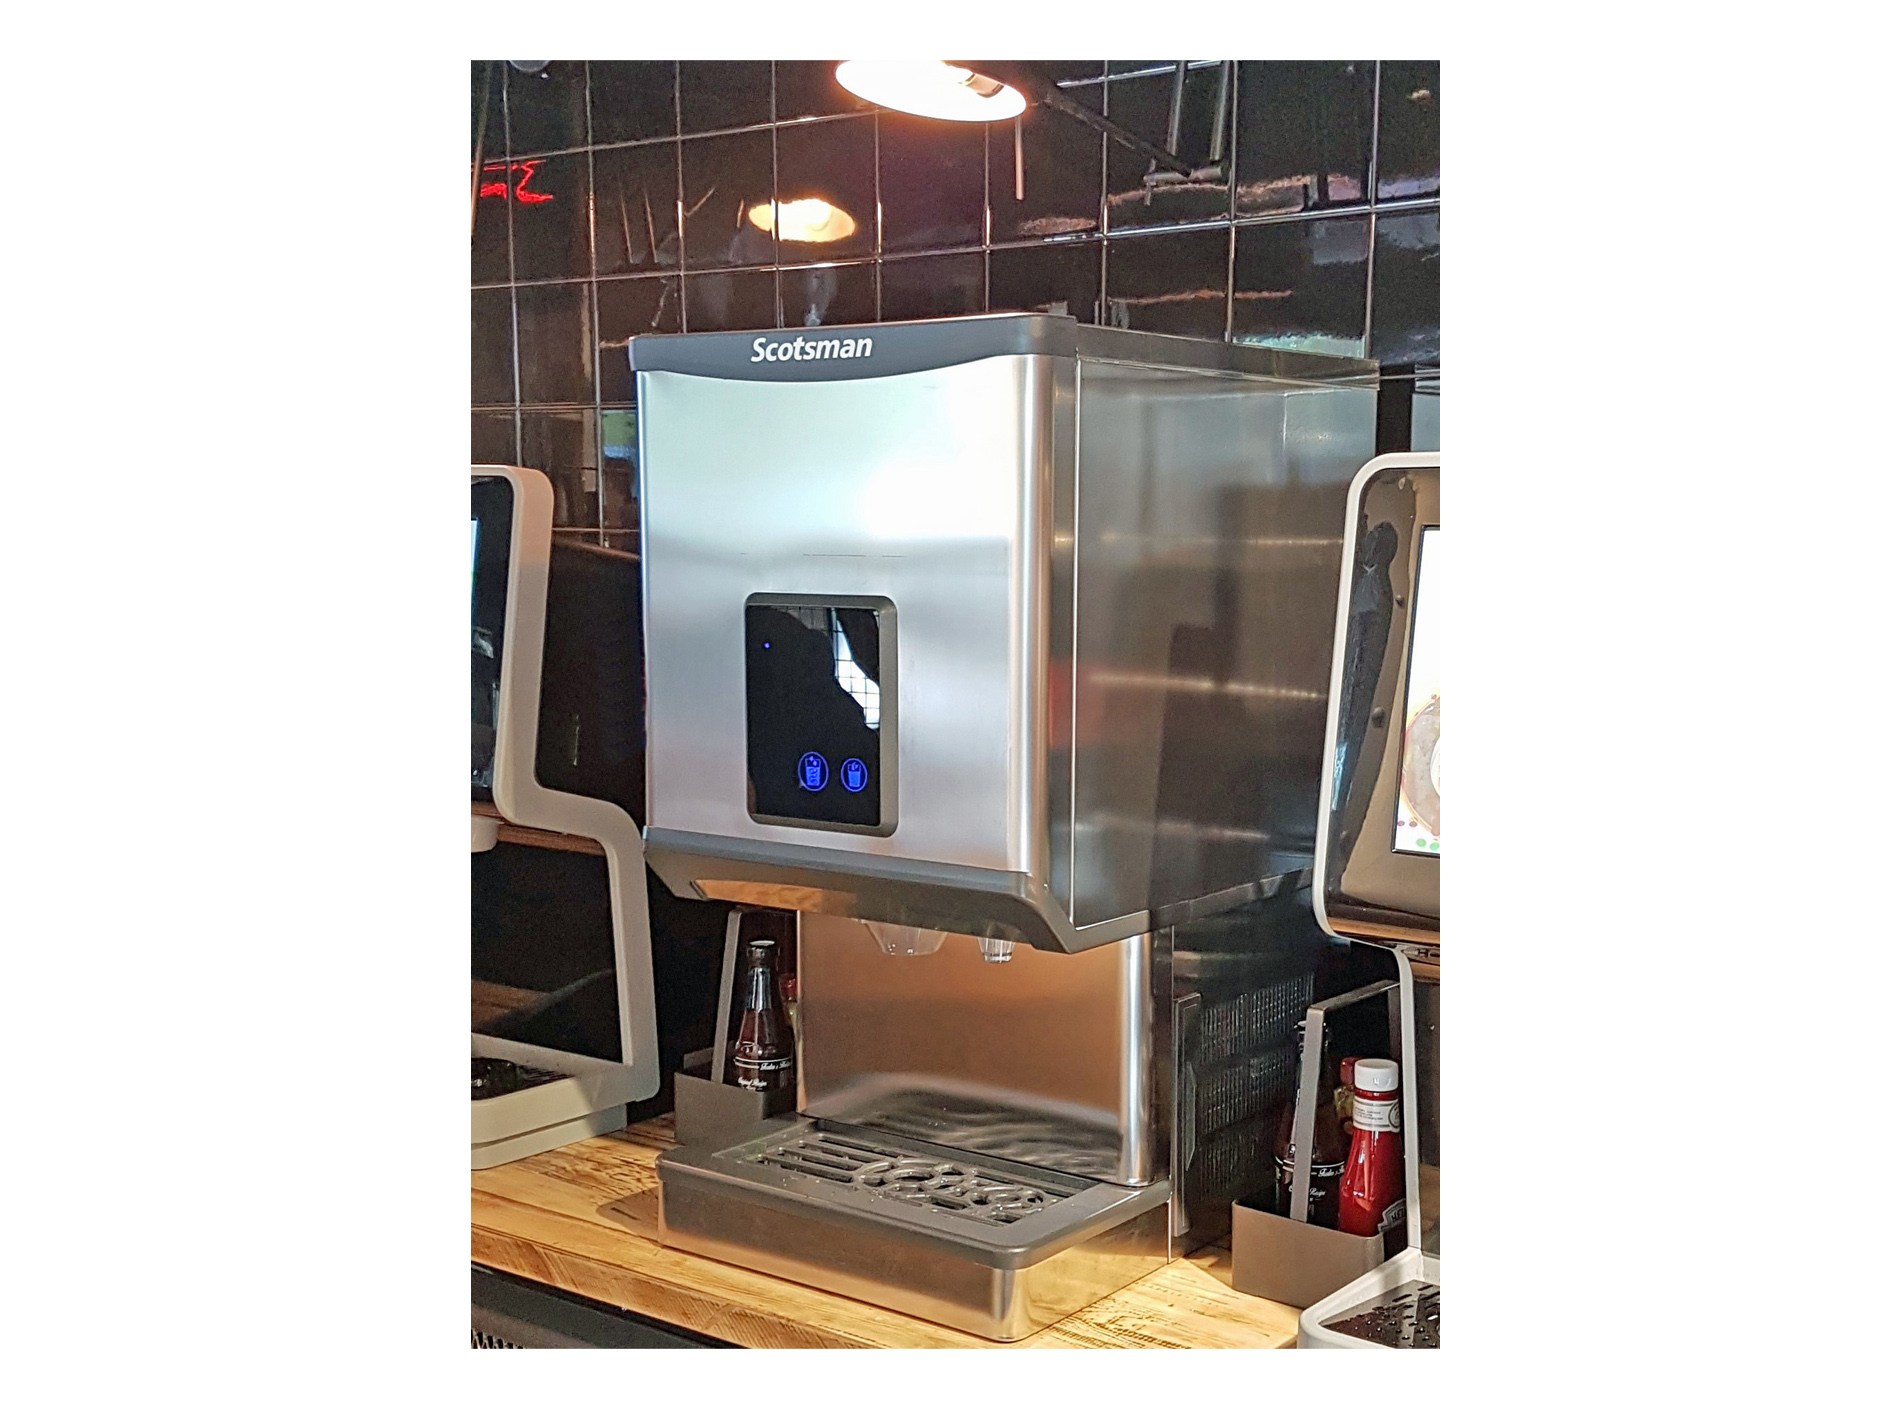 Self-serve-ice: latest Scotsman dispenser offers ice on (hands-free) tap